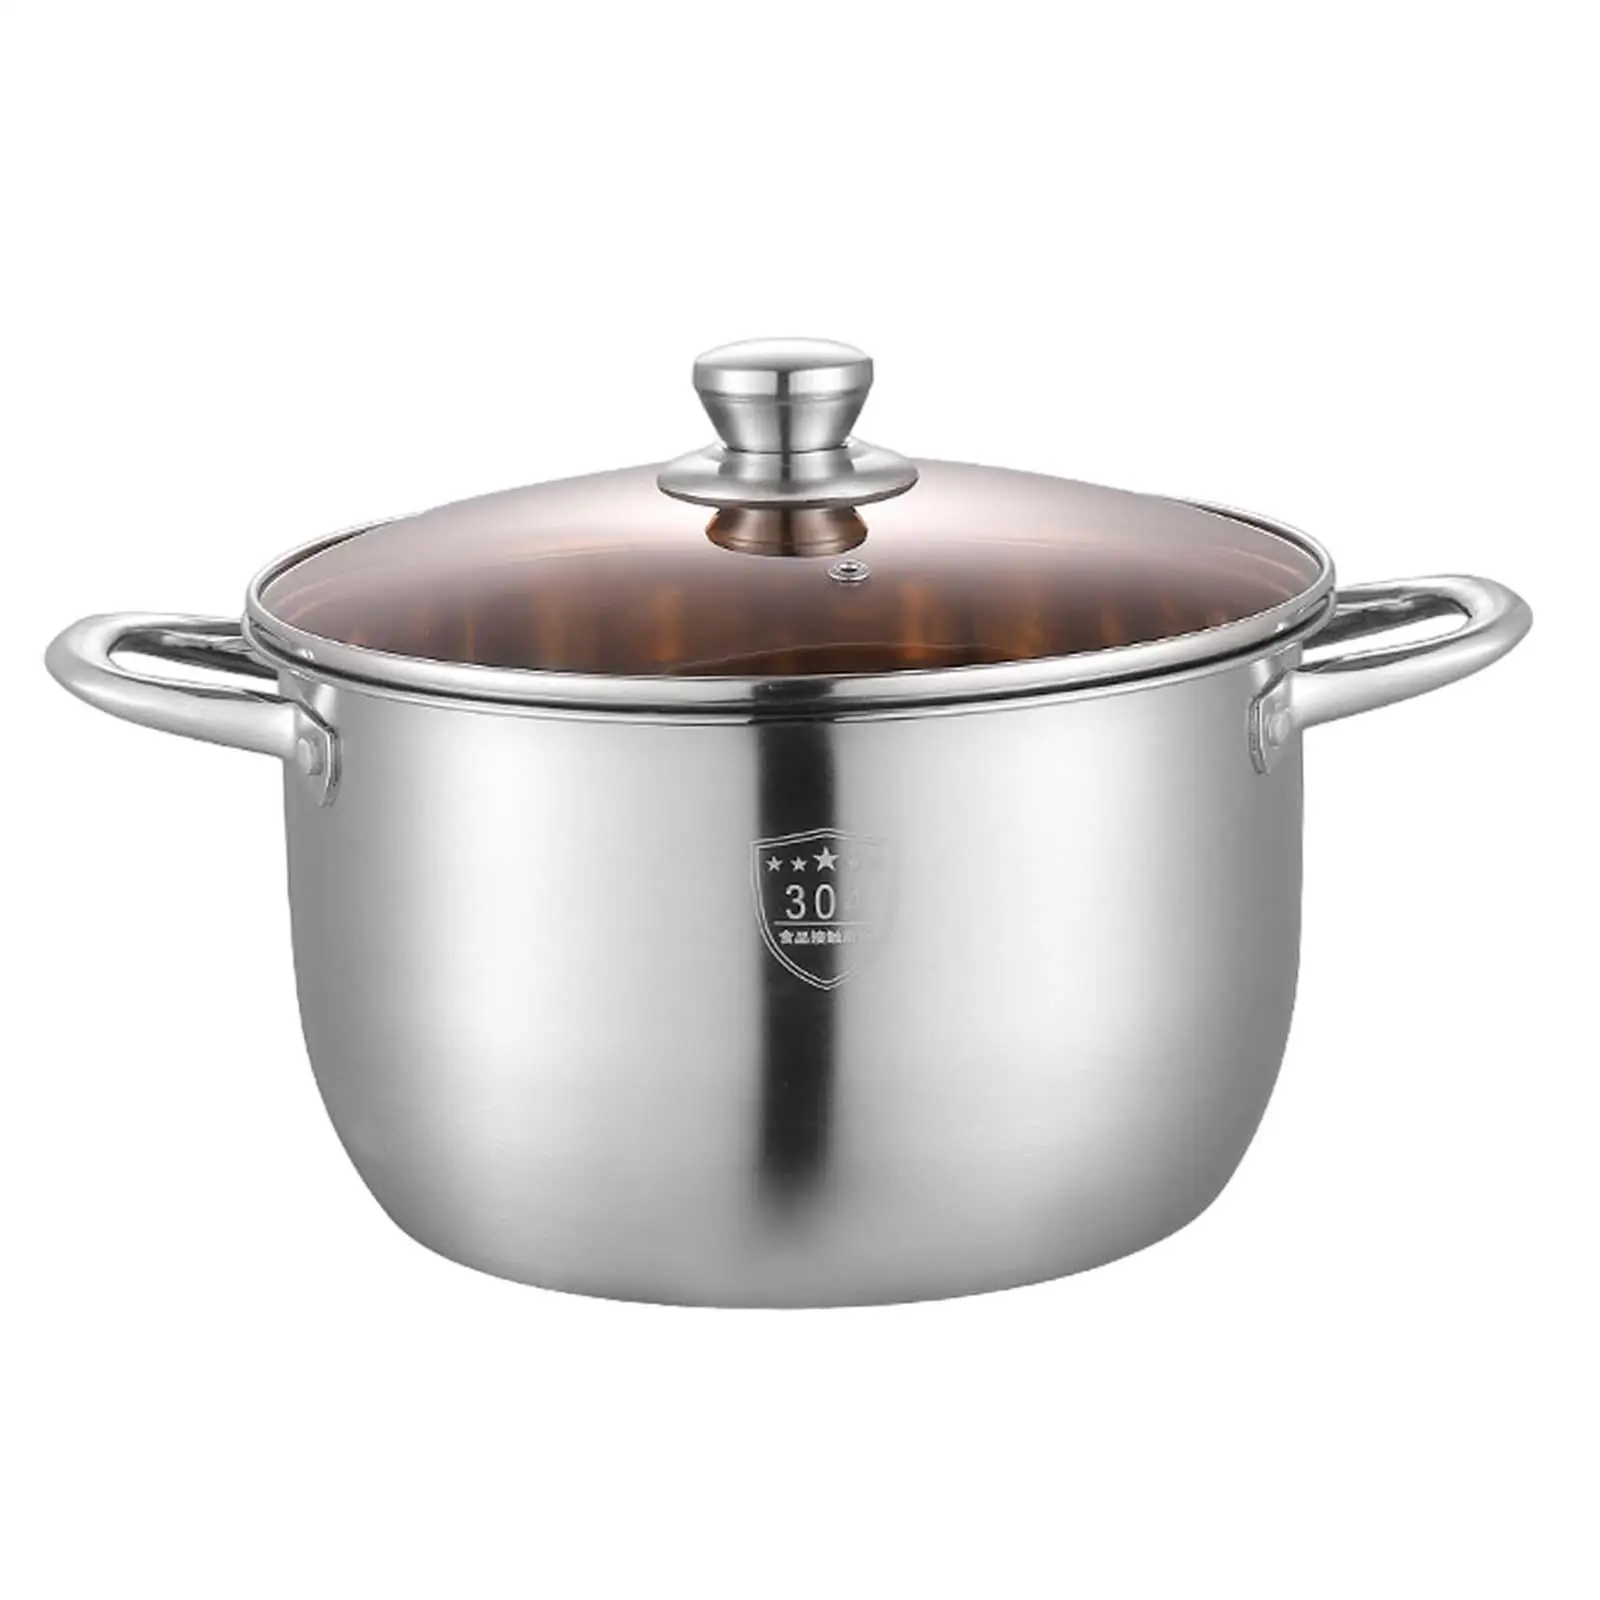 Stainless Steel Stockpot Thick Bottom Cookware Pasta Pot Dual Handle Small Saucepan for Sauce Soup Vegetables Meat Warming Milk